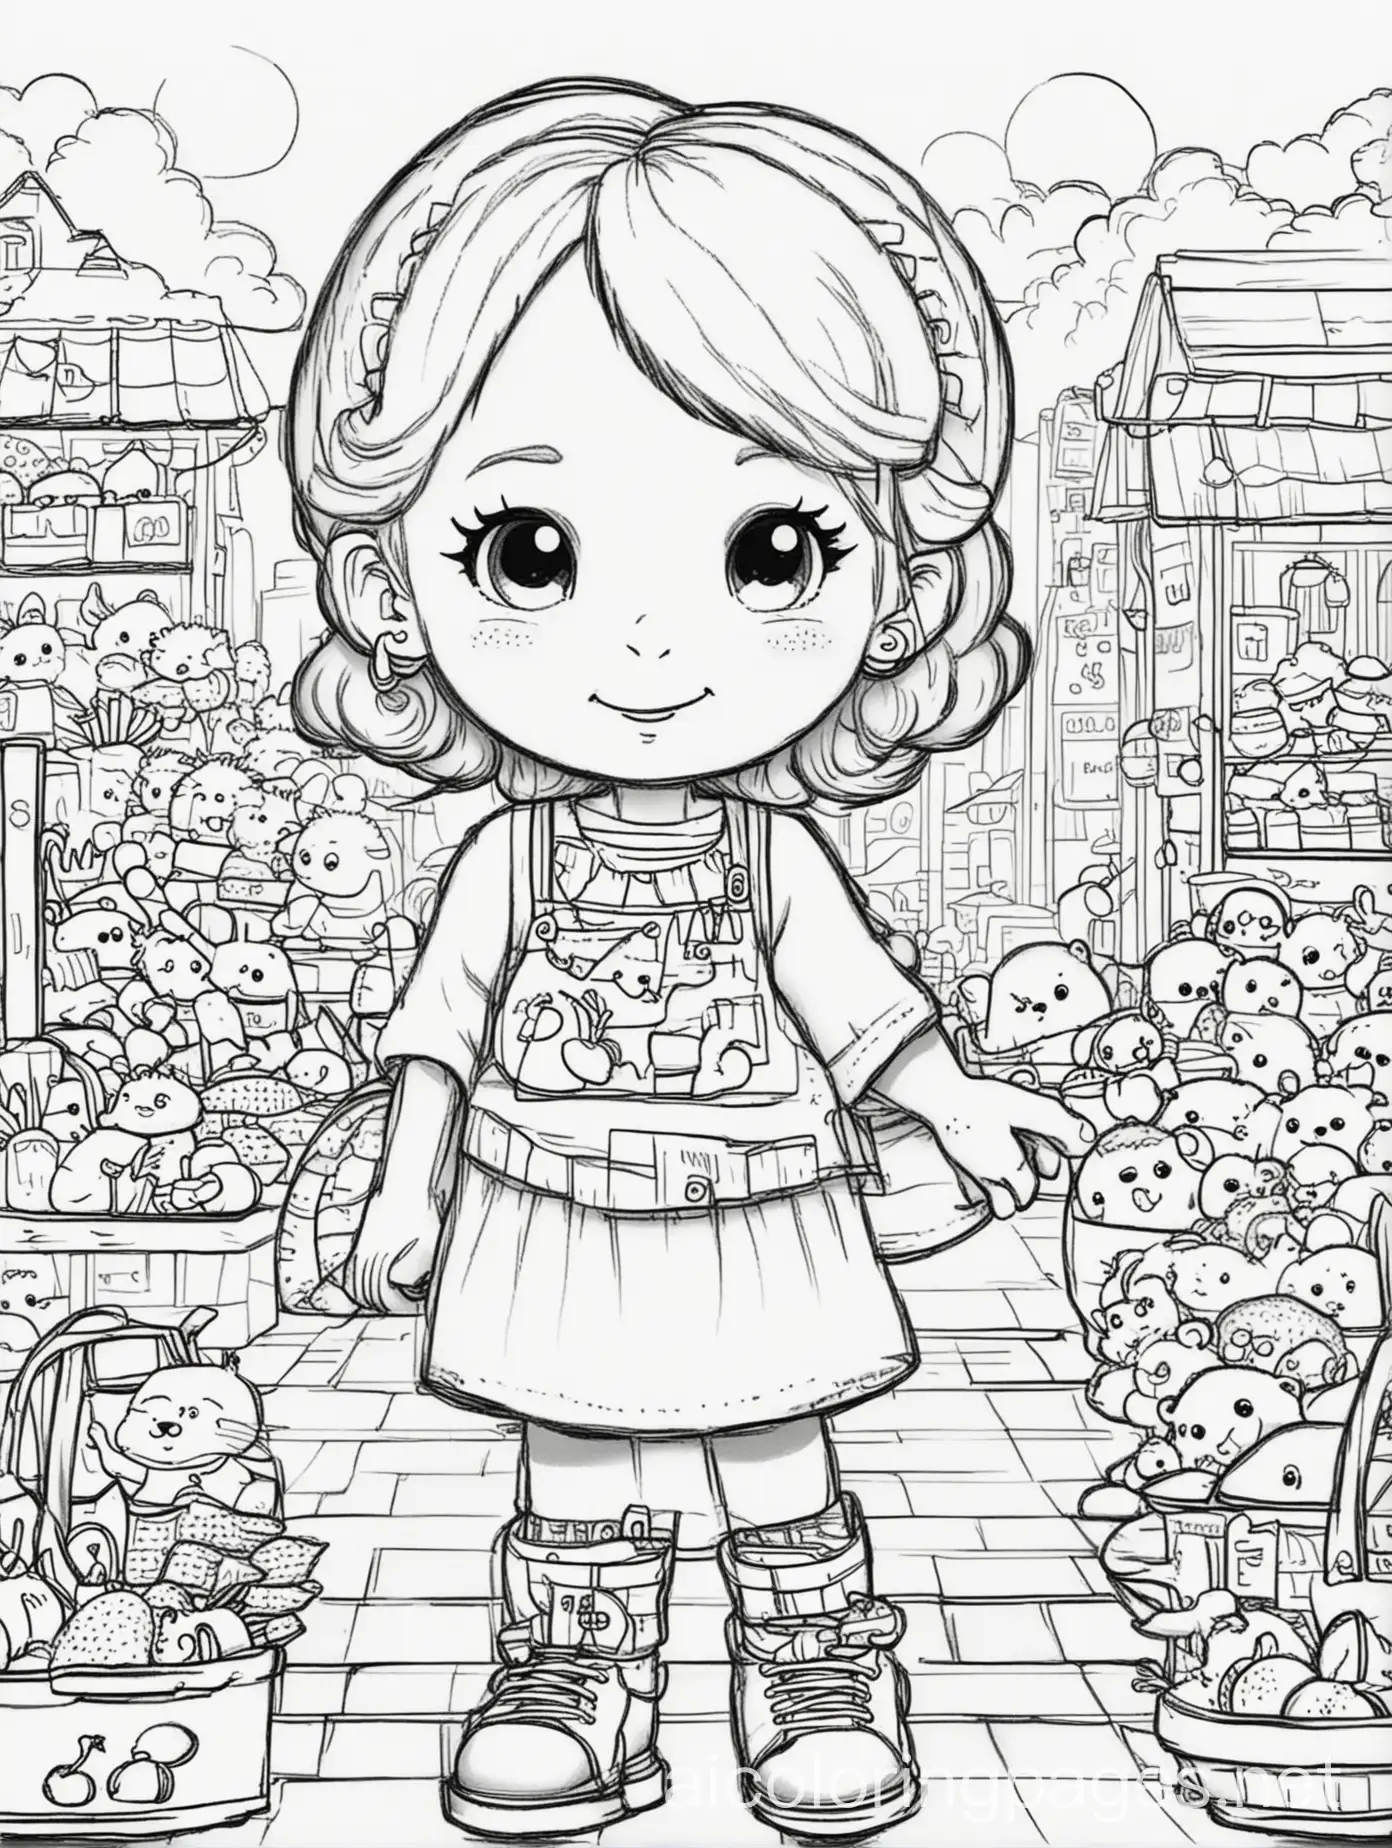 Kid fun friends. In Market, Coloring Page, black and white, line art, white background, Simplicity, Ample White Space. The background of the coloring page is plain white to make it easy for young children to color within the lines. The outlines of all the subjects are easy to distinguish, making it simple for kids to color without too much difficulty